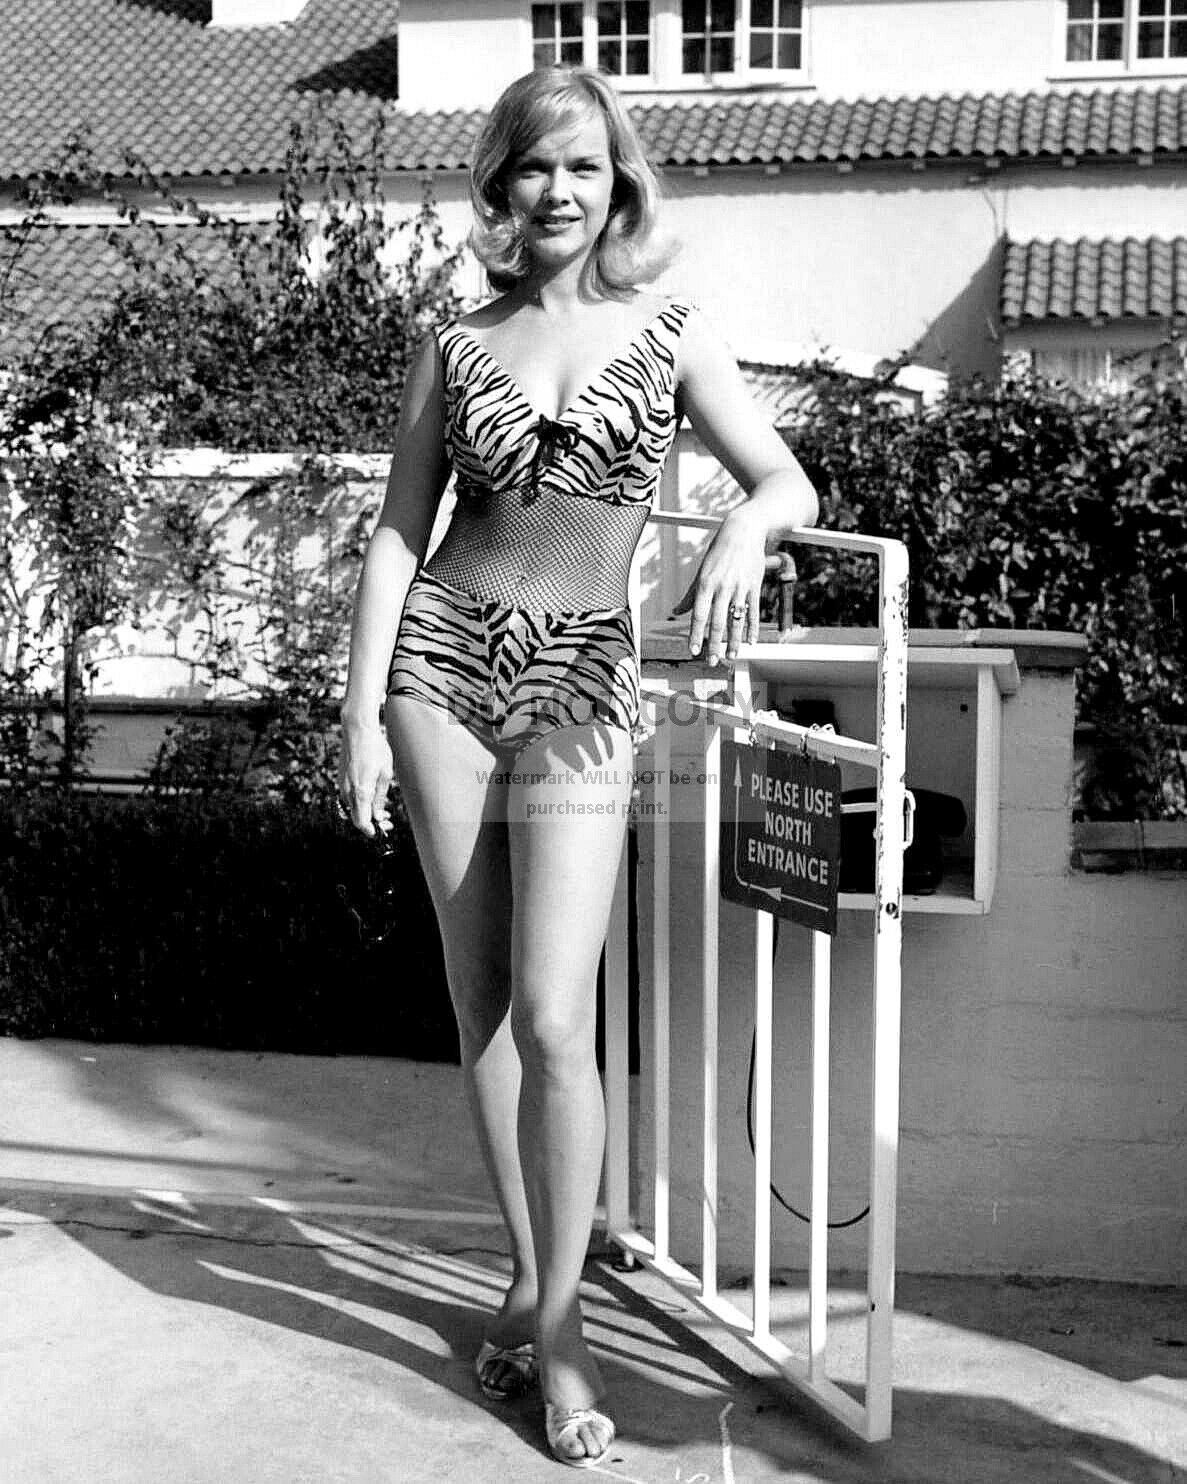 ACTRESS ANNE FRANCIS PIN UP - 8X10 PUBLICITY PHOTO (MW243)